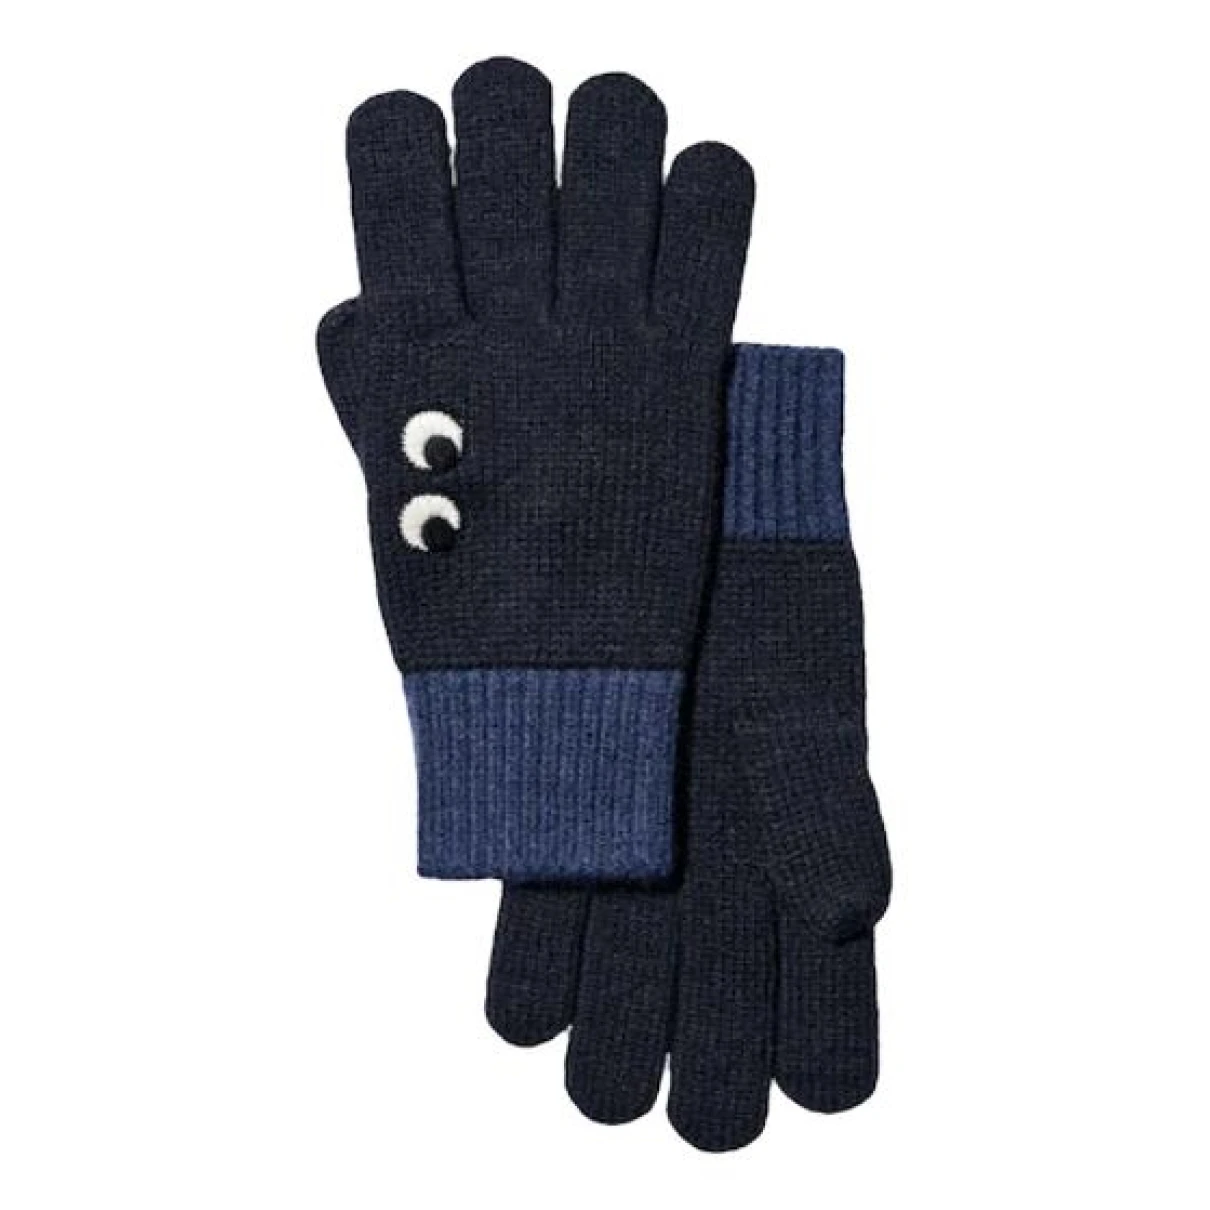 accessories Anya Hindmarch gloves for Female Wool M International. Used condition